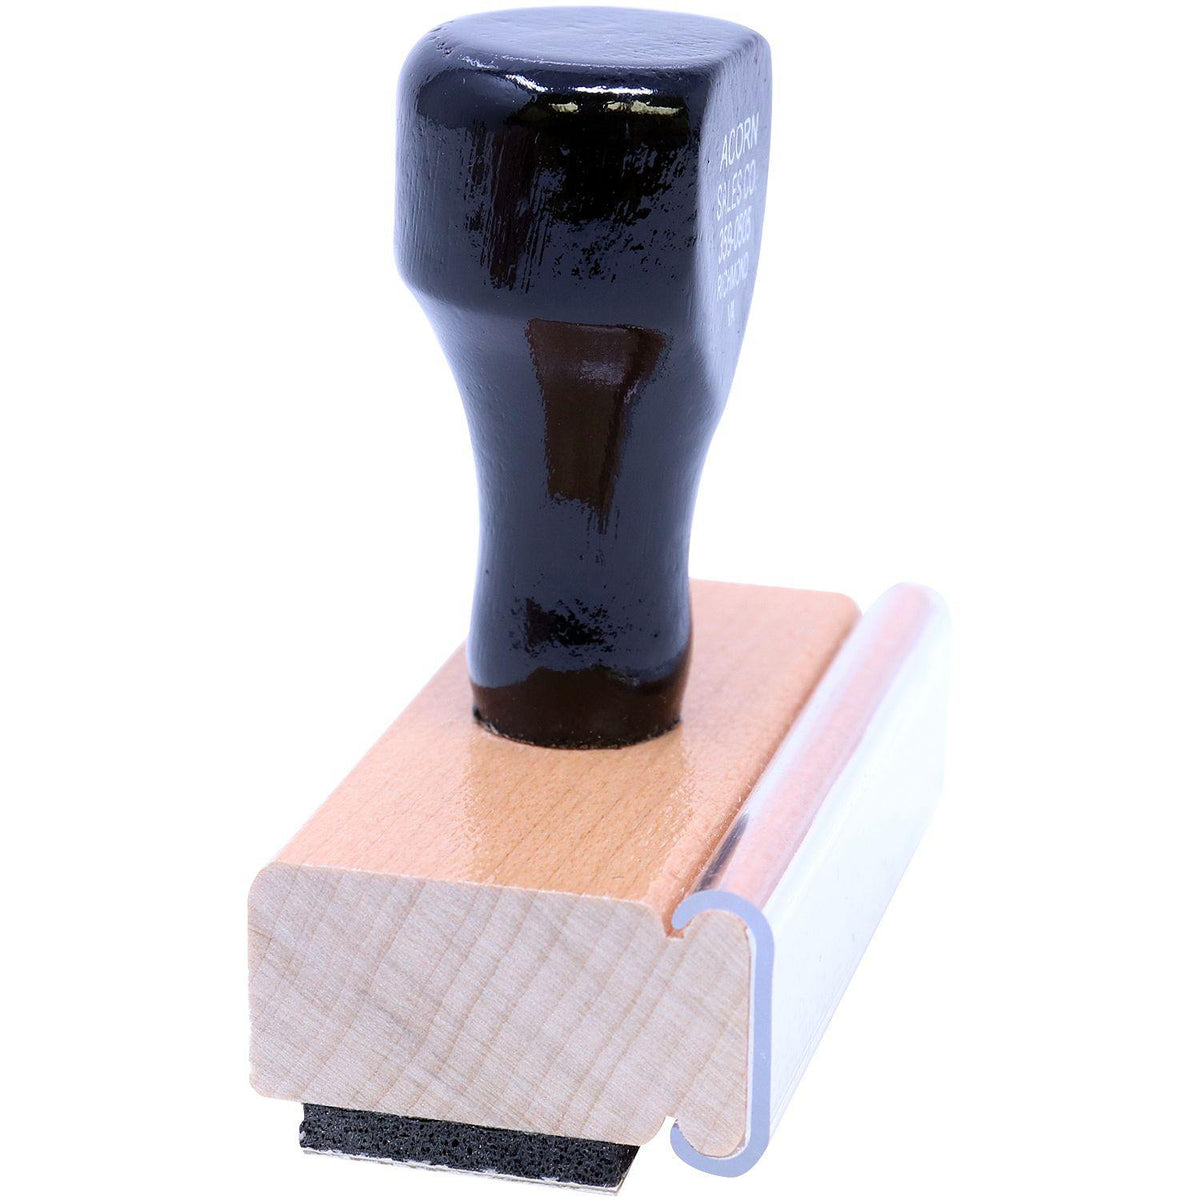 Medical Co Pay Rubber Stamp - Engineer Seal Stamps - Brand_Acorn, Impression Size_Small, Stamp Type_Regular Stamp, Type of Use_Finance, Type of Use_Medical Office, Type of Use_Office